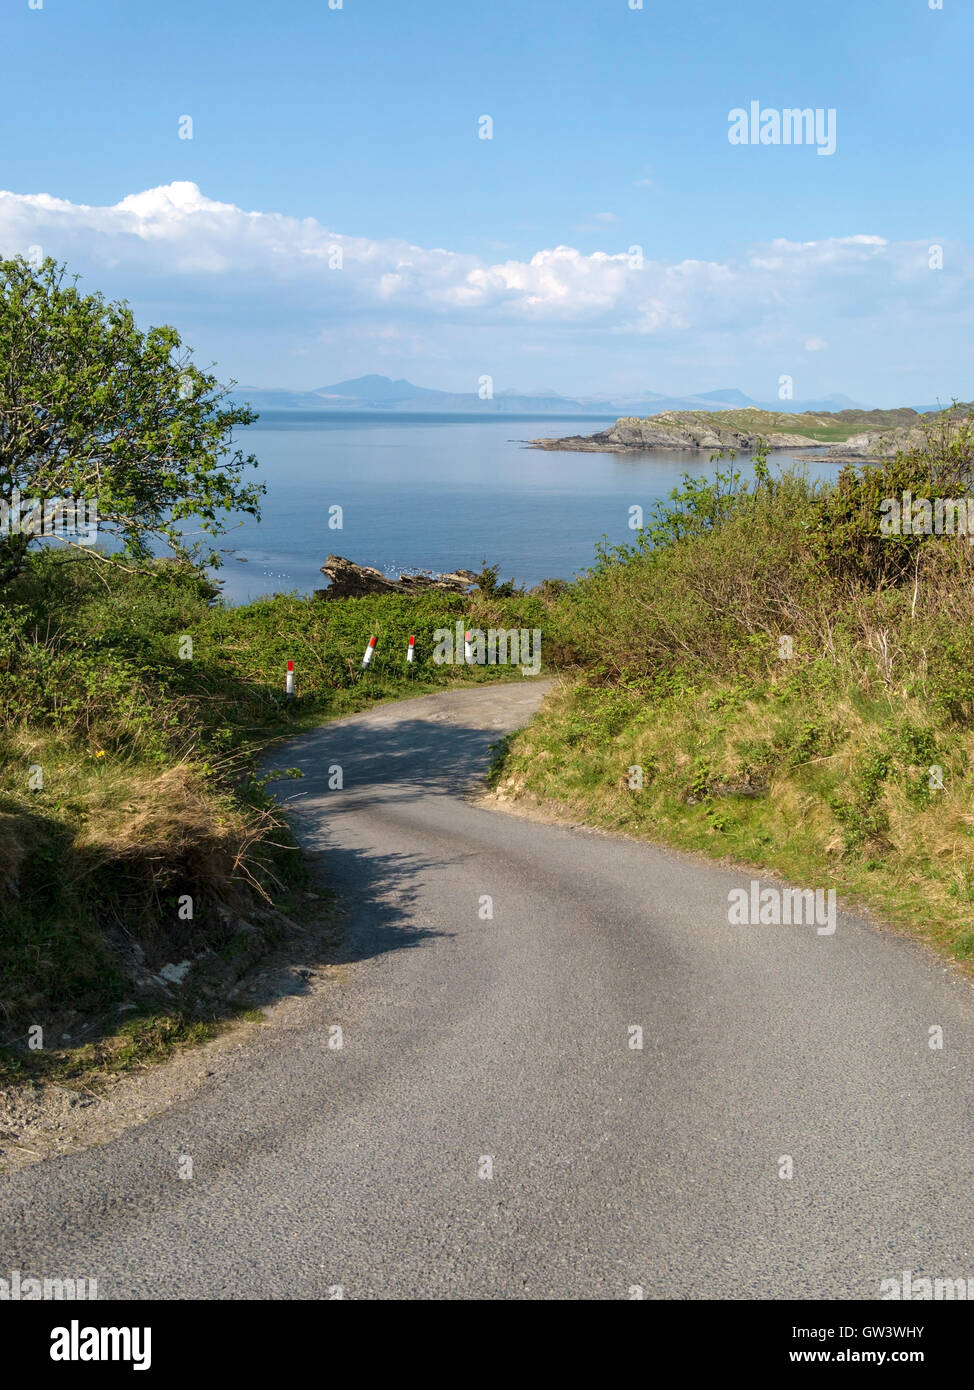 Winding single track road on the Island of Colonsay with views over the sea to Isle of Mull in the Inner Hebrides, Scotland, UK. Stock Photo